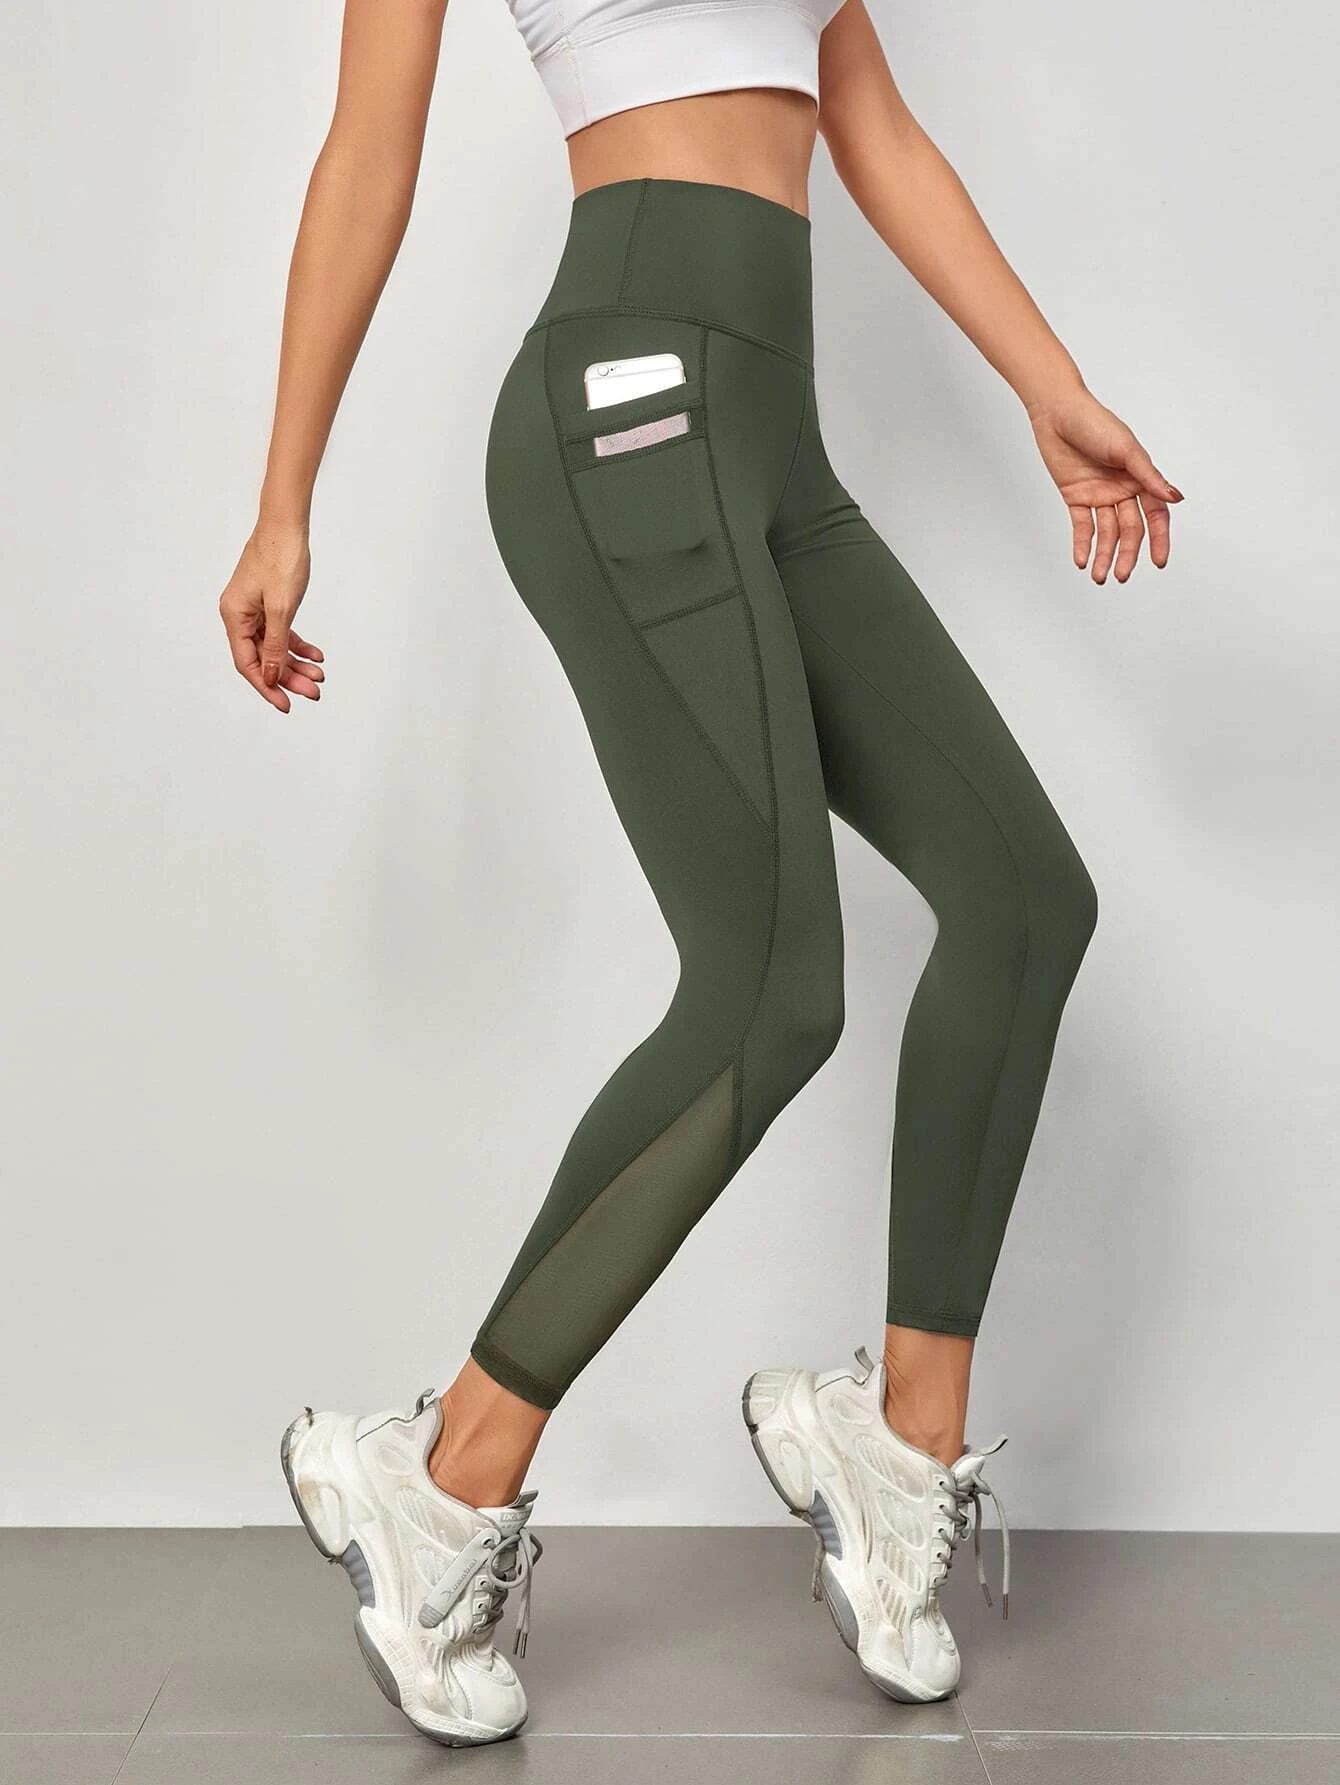 How to Wear Mesh Workout Leggings: Top 15 Sporty Outfit Ideas